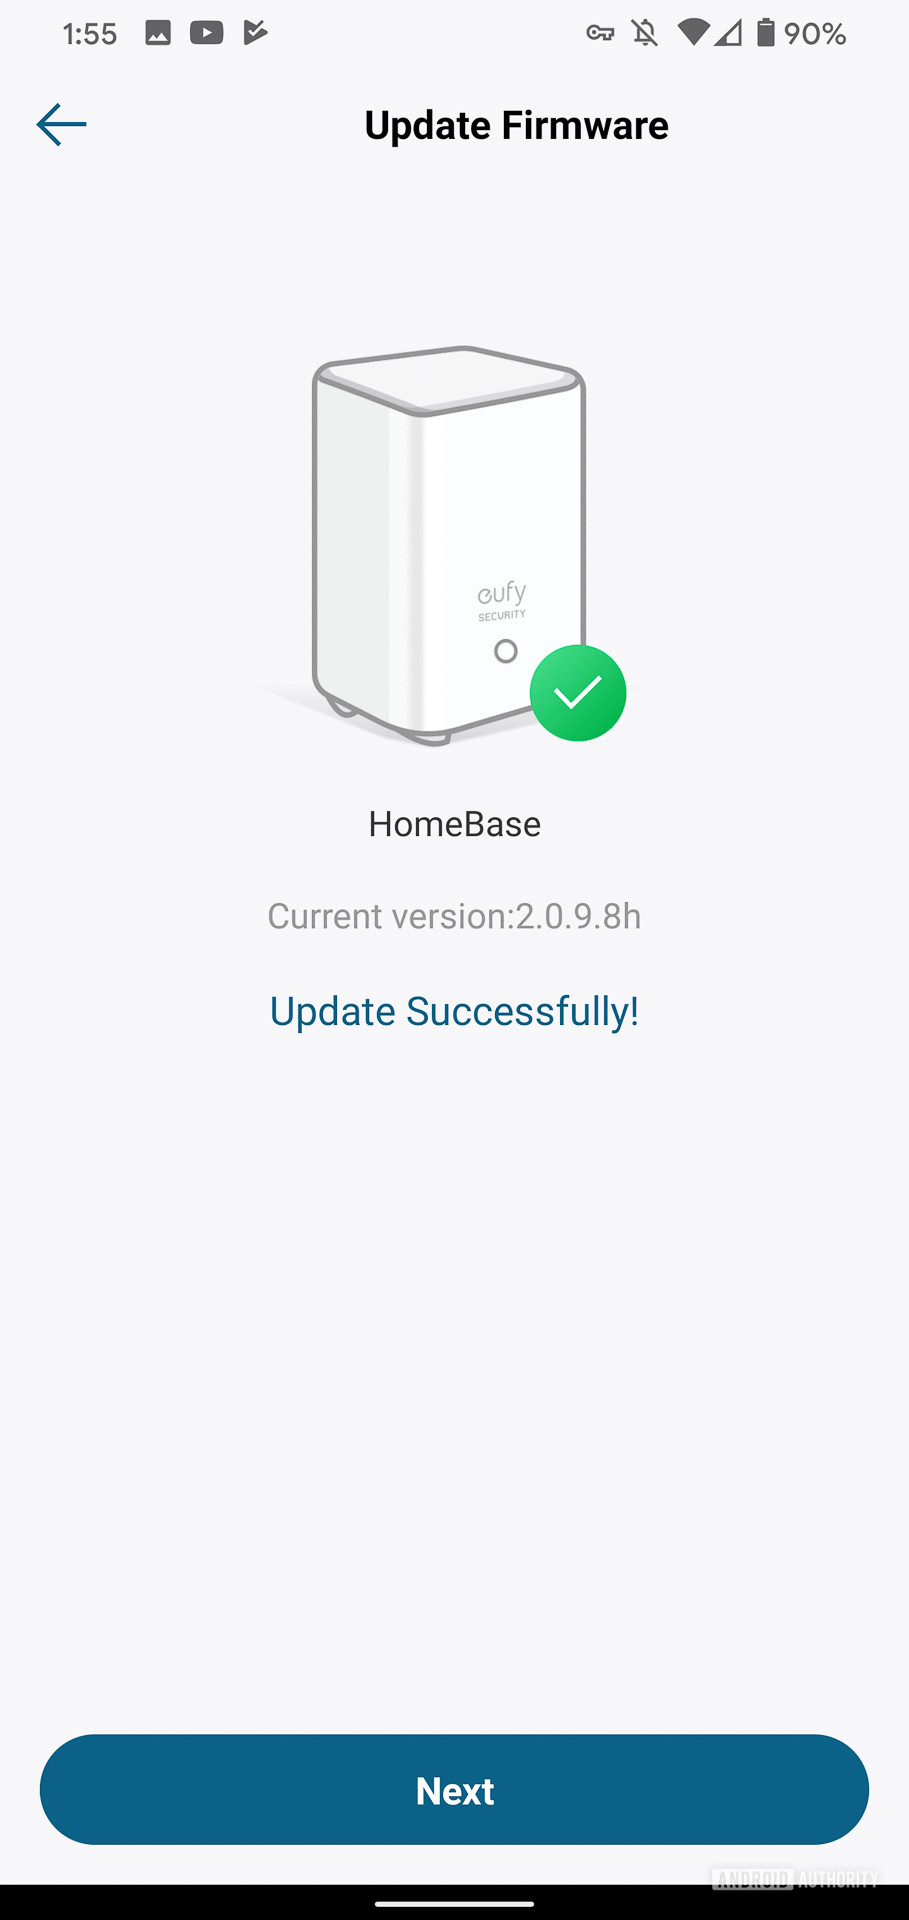 Eufy Video Doorbell home base connected